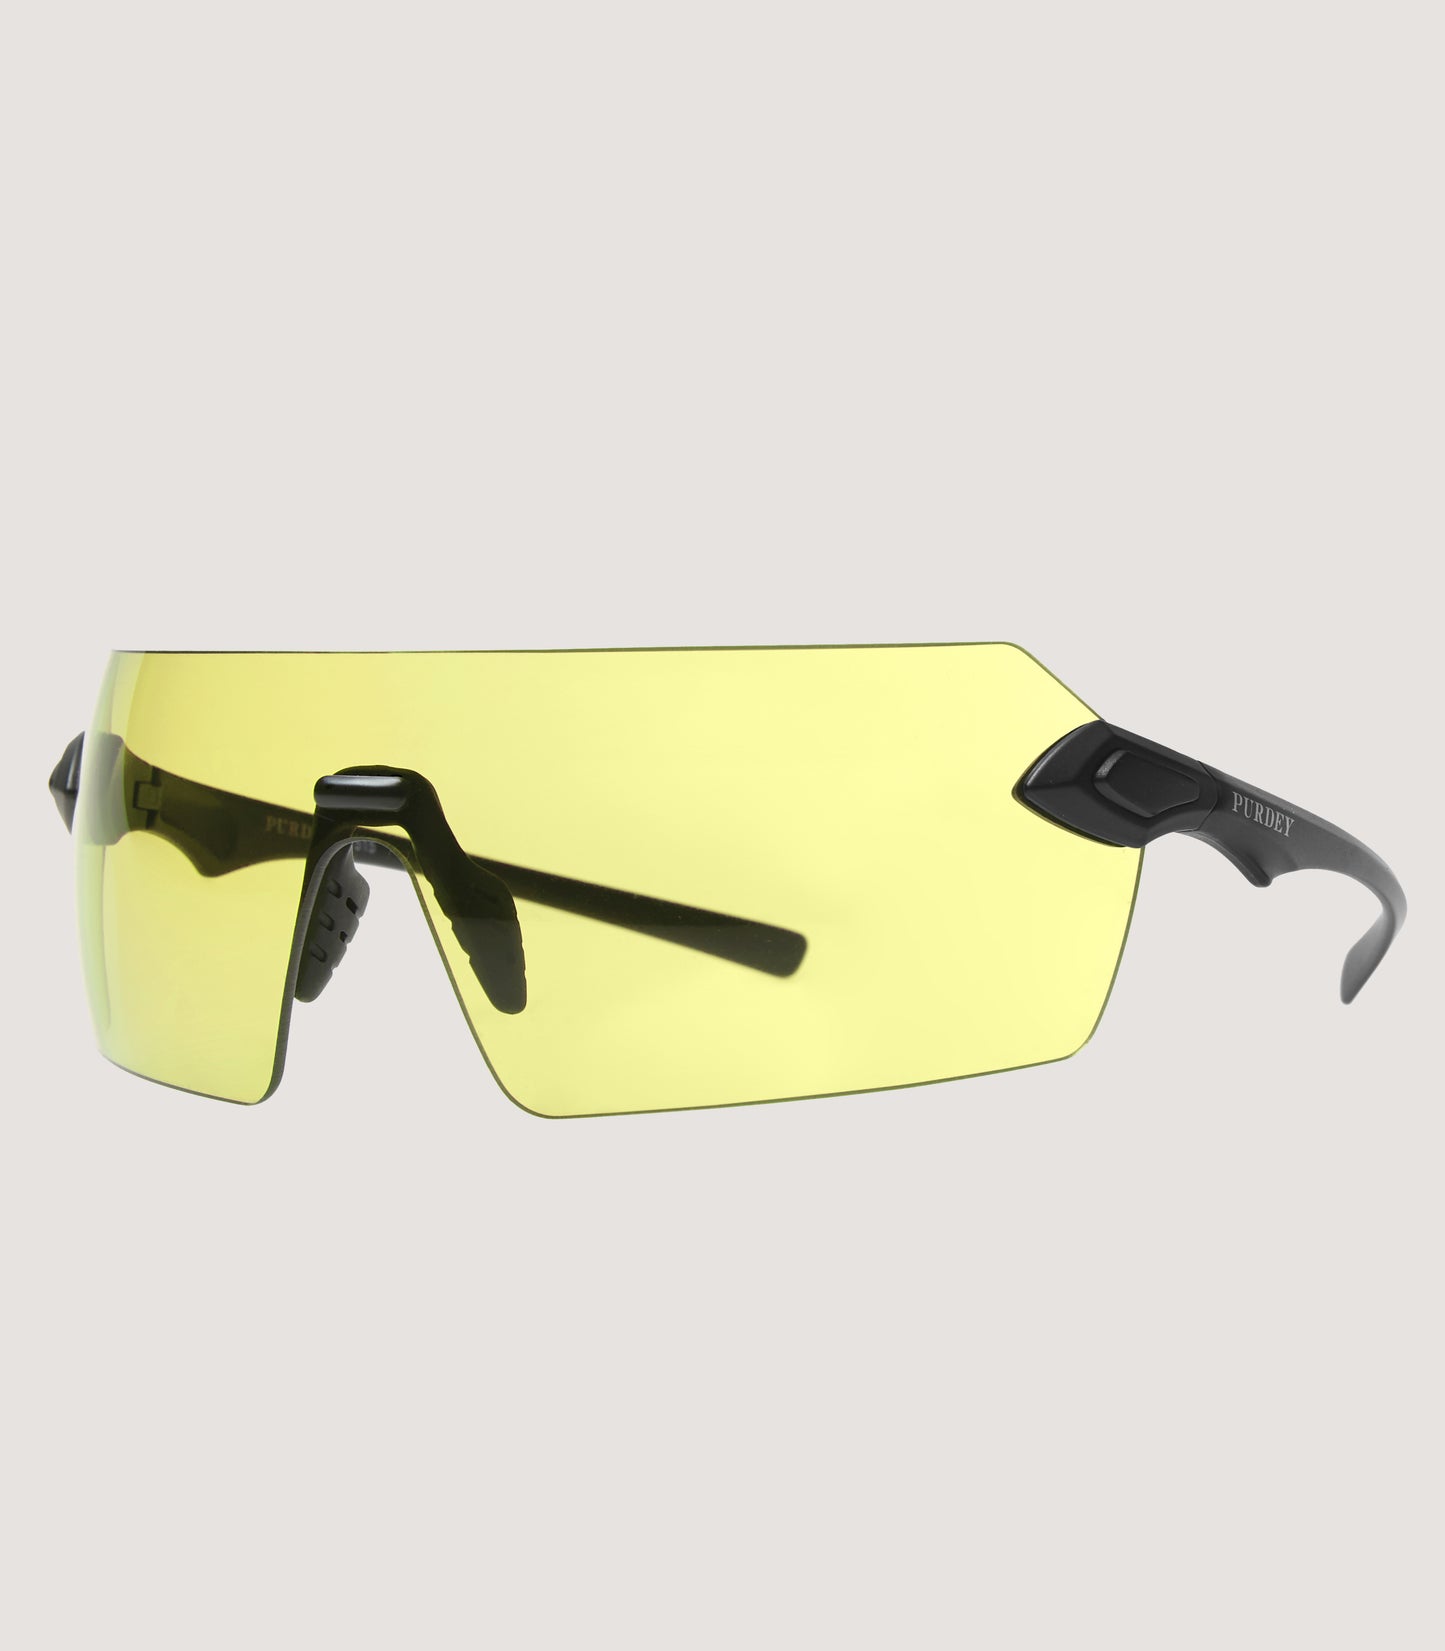 Purdey Glasses - Single Pair In Yellow